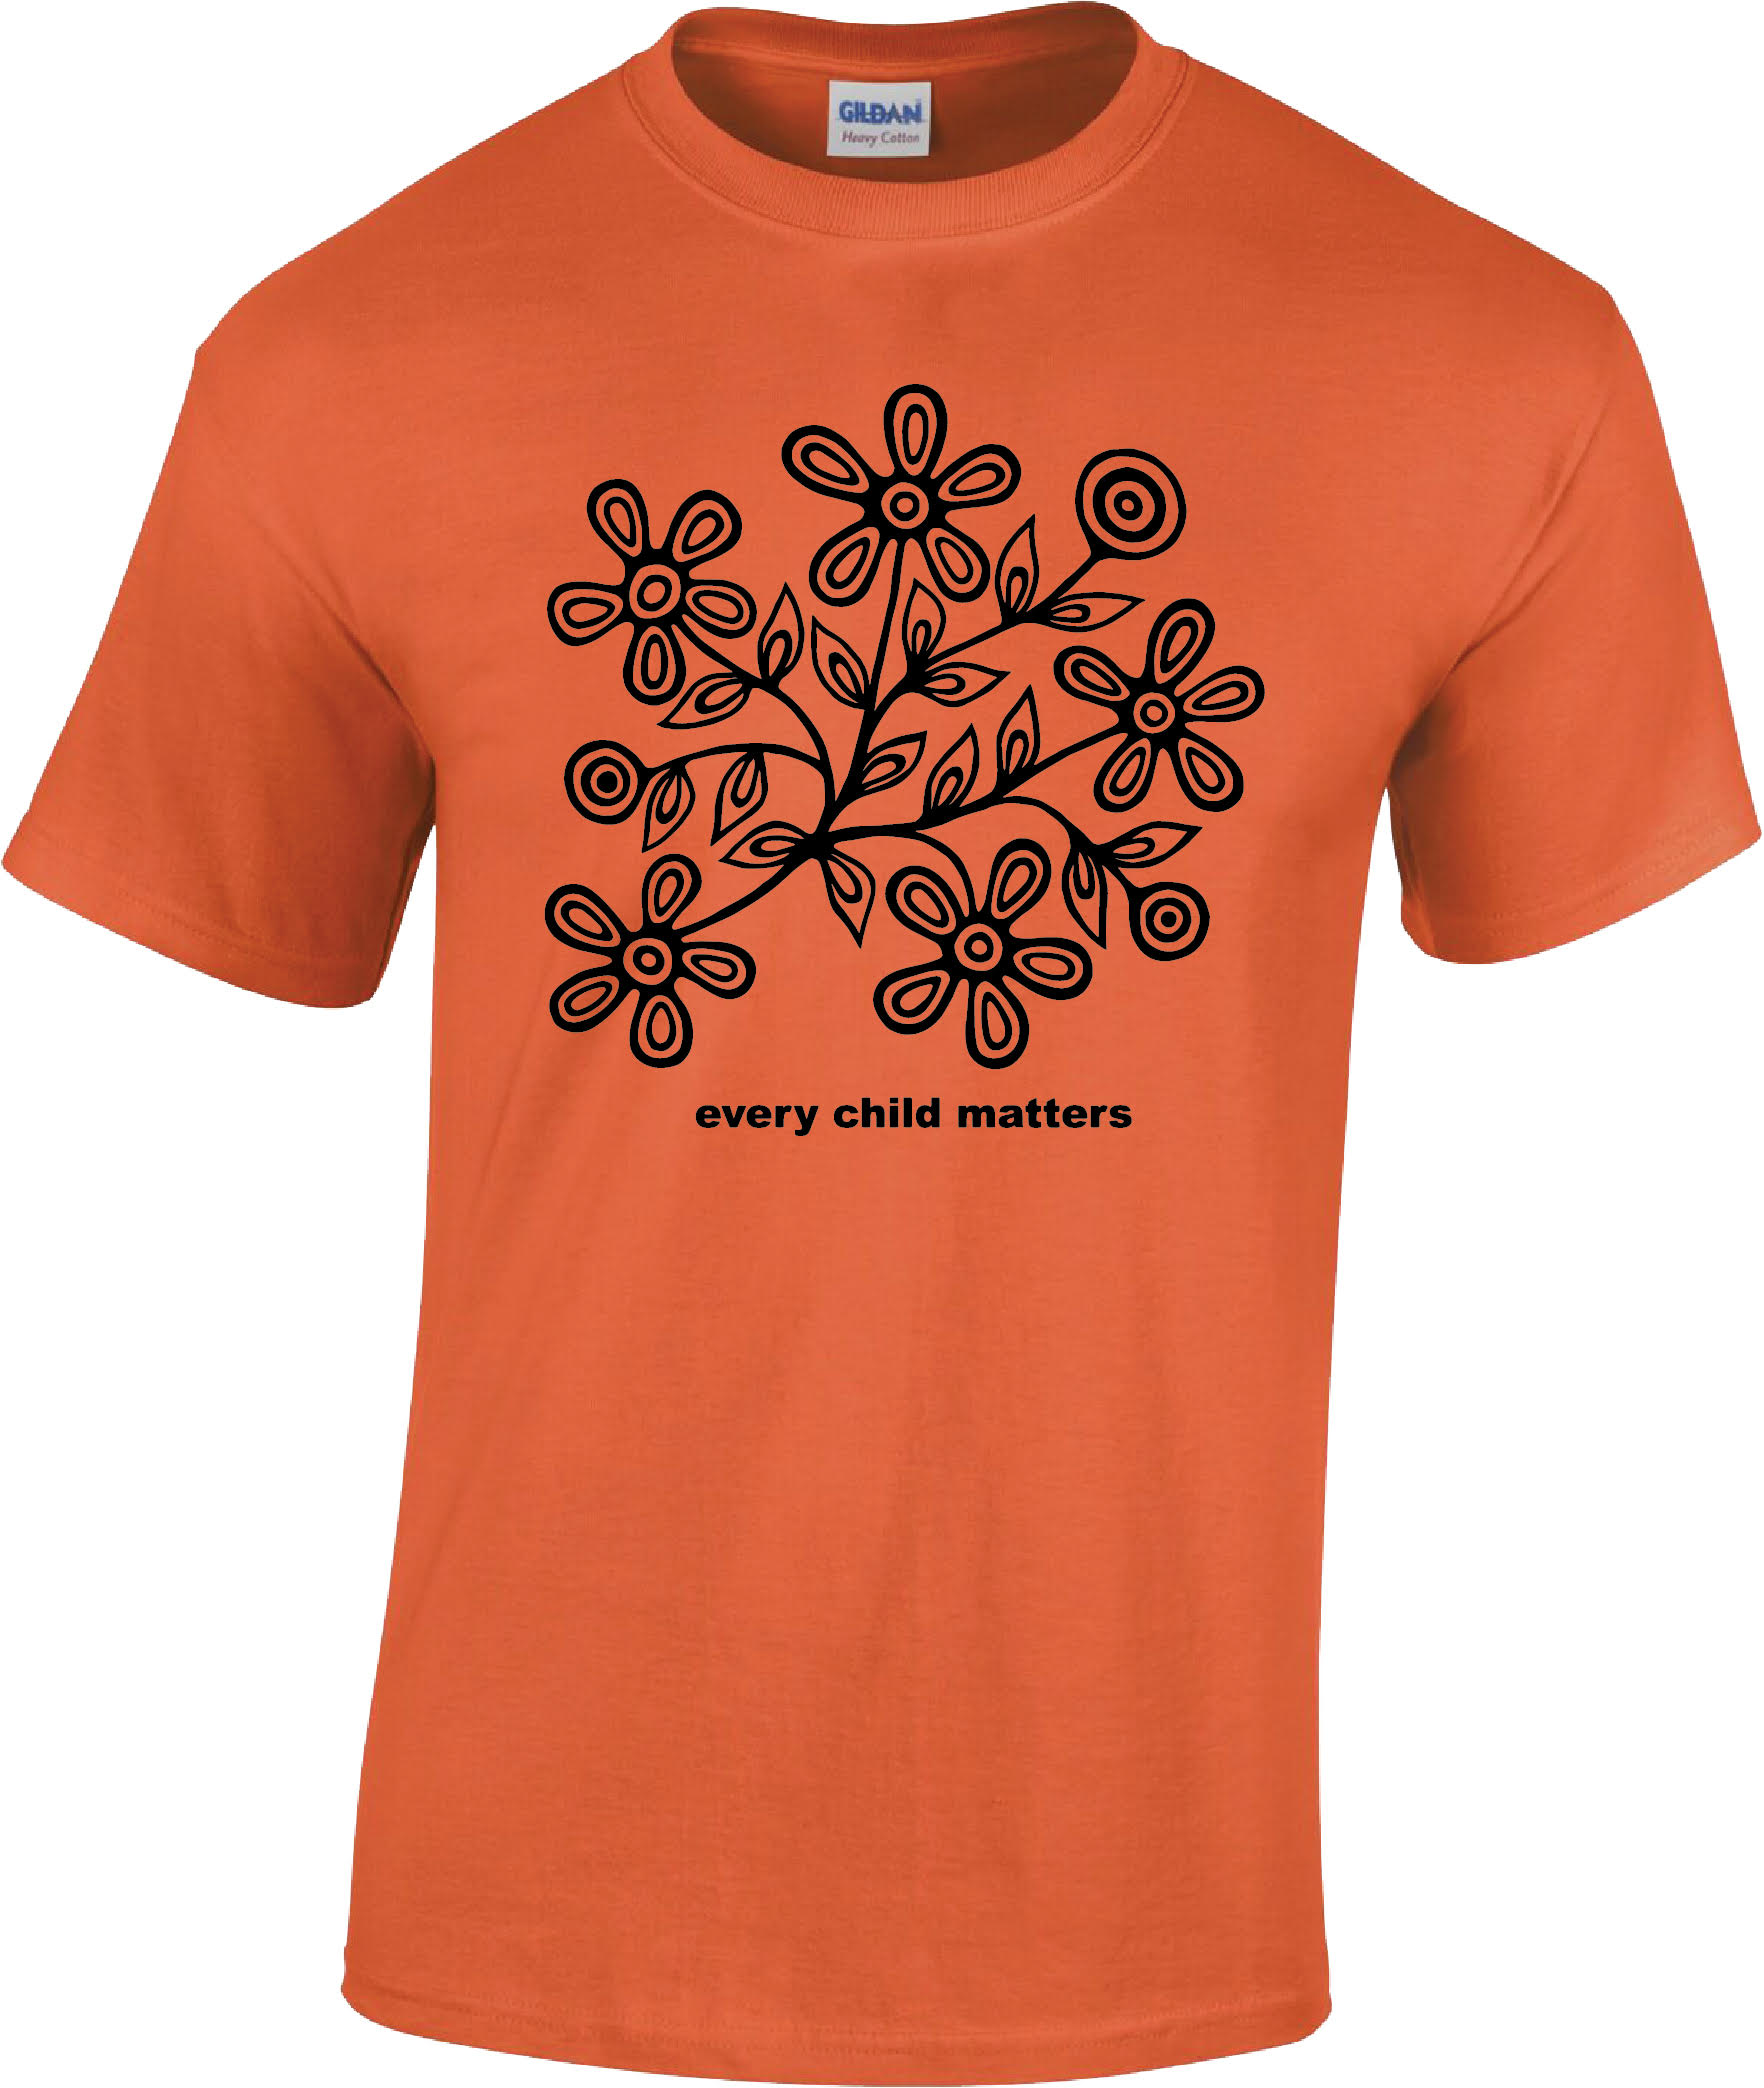 The shirt features beautiful flowers in the center with the slogan under to remember the lives of those children lost to residential schools